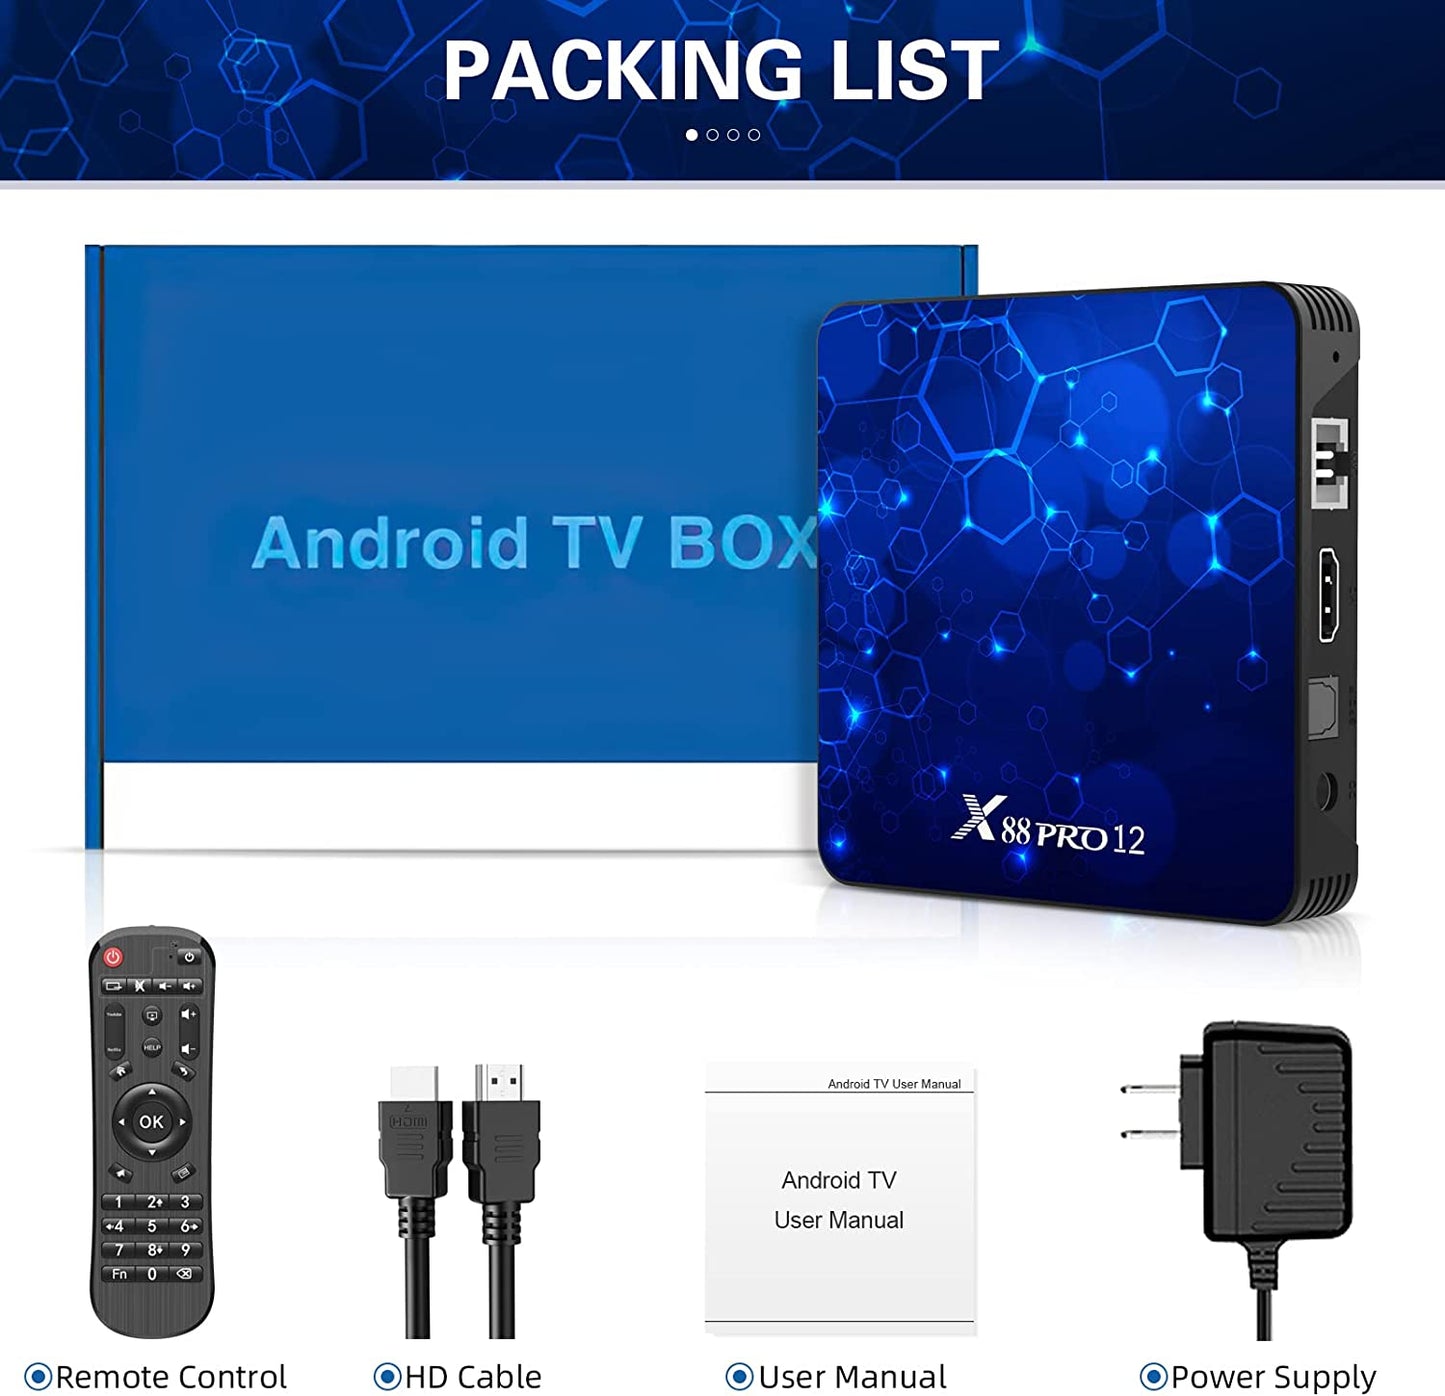 Android 12.0 TV Box, X88 PRO 12 Android TV Box 4GB RAM 32GB ROM RK3318 Quad-Core 64bit Support 4K 3D HD H.265 Ethernet 2.4G/5G Dual-Band WiFi BT5.0 Smart TV Box